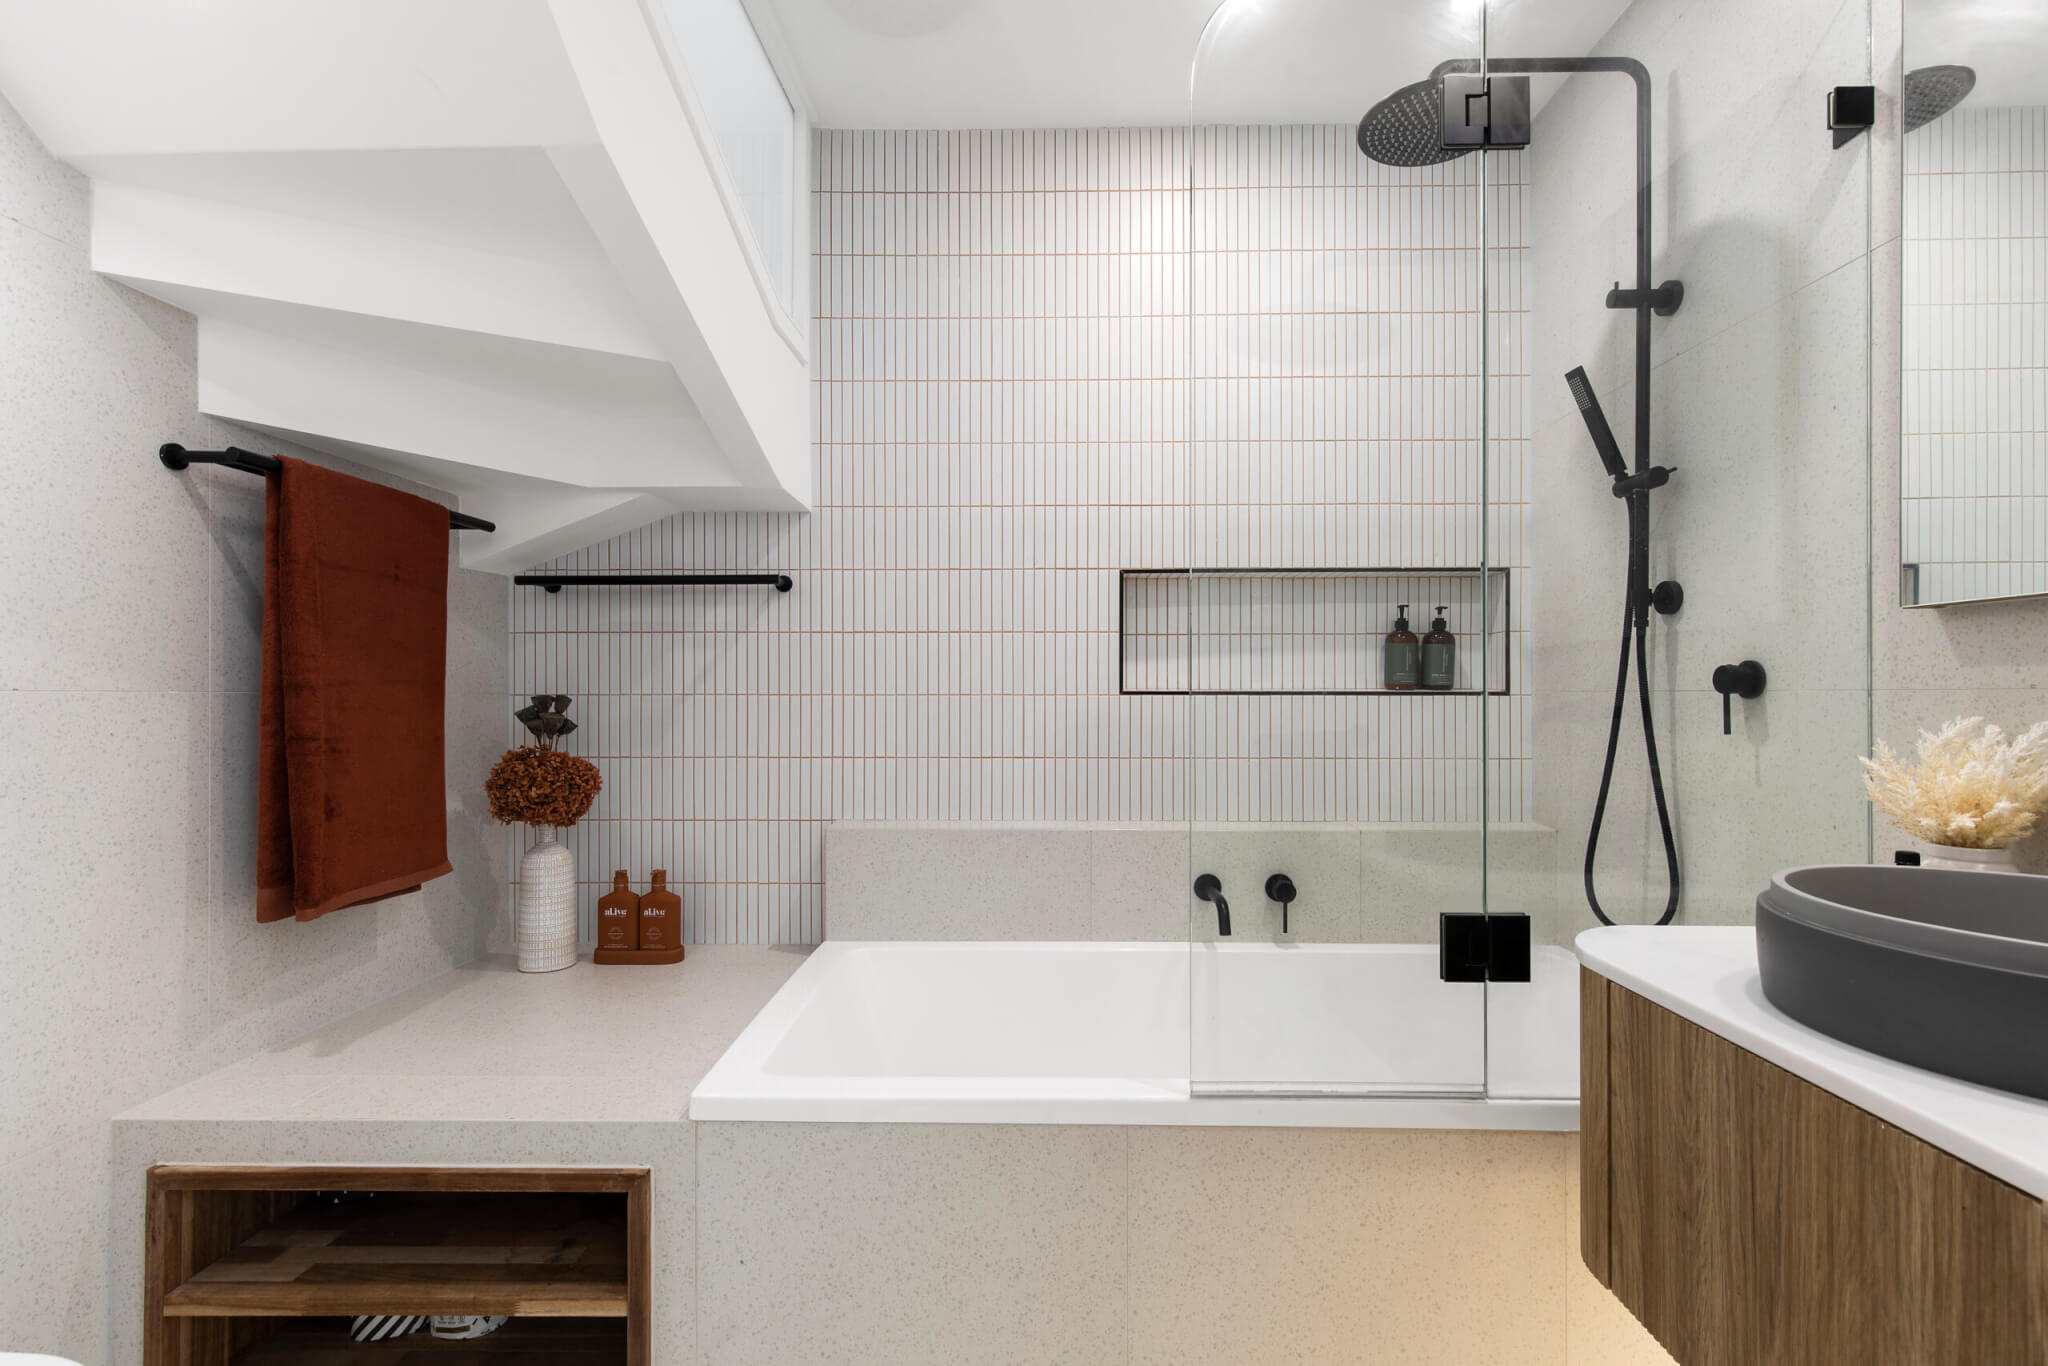 5 Questions to Ask Yourself Before Starting Bathroom Renovations with Novalé